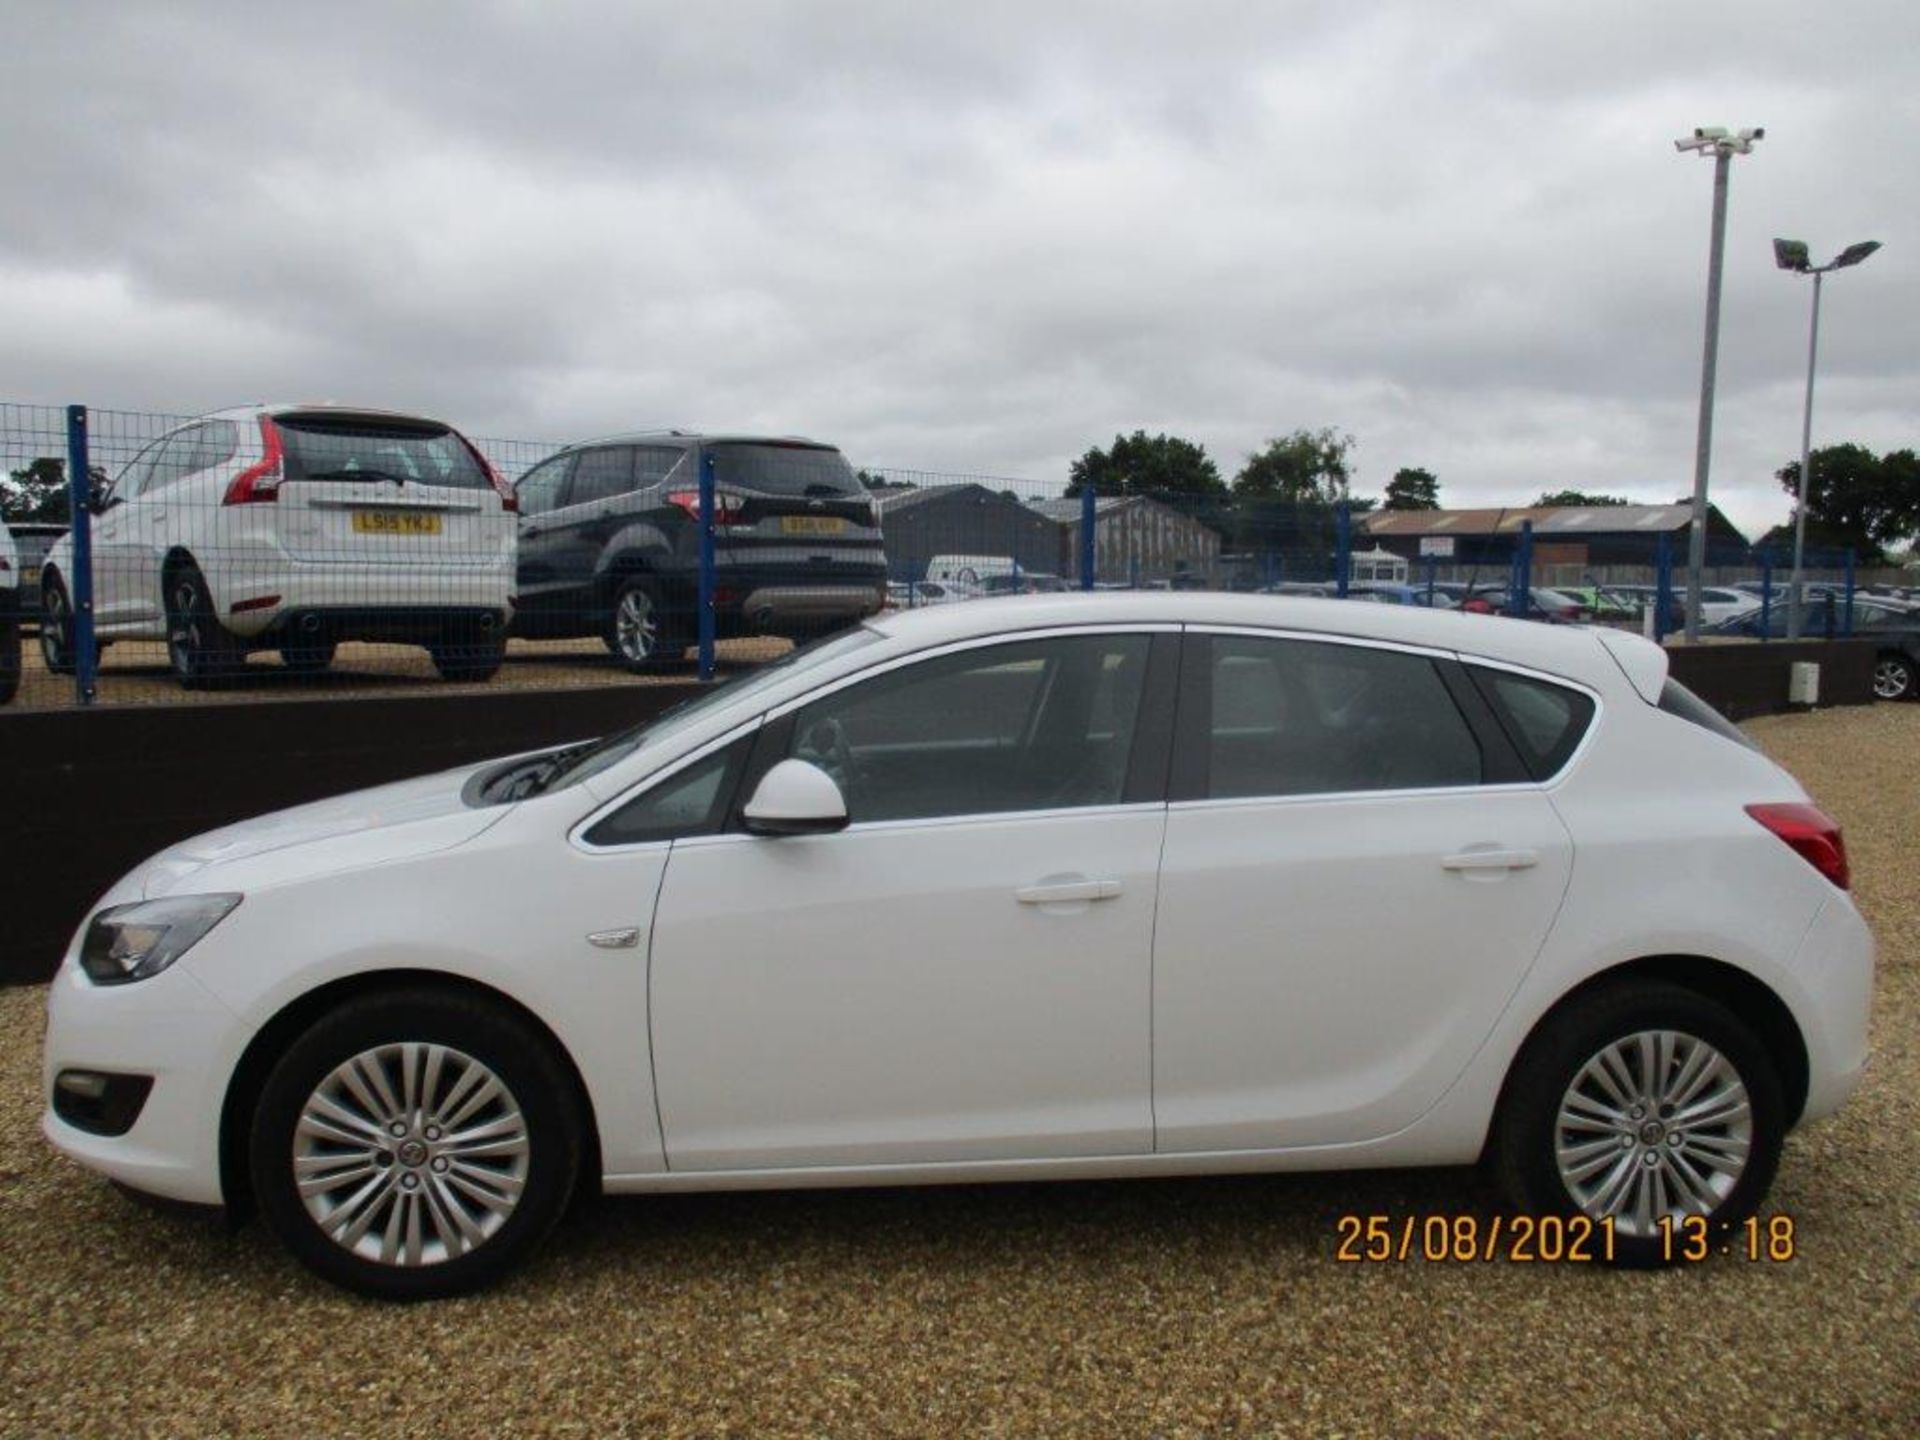 64 14 Vauxhall Astra Excite CDTi - Image 4 of 19